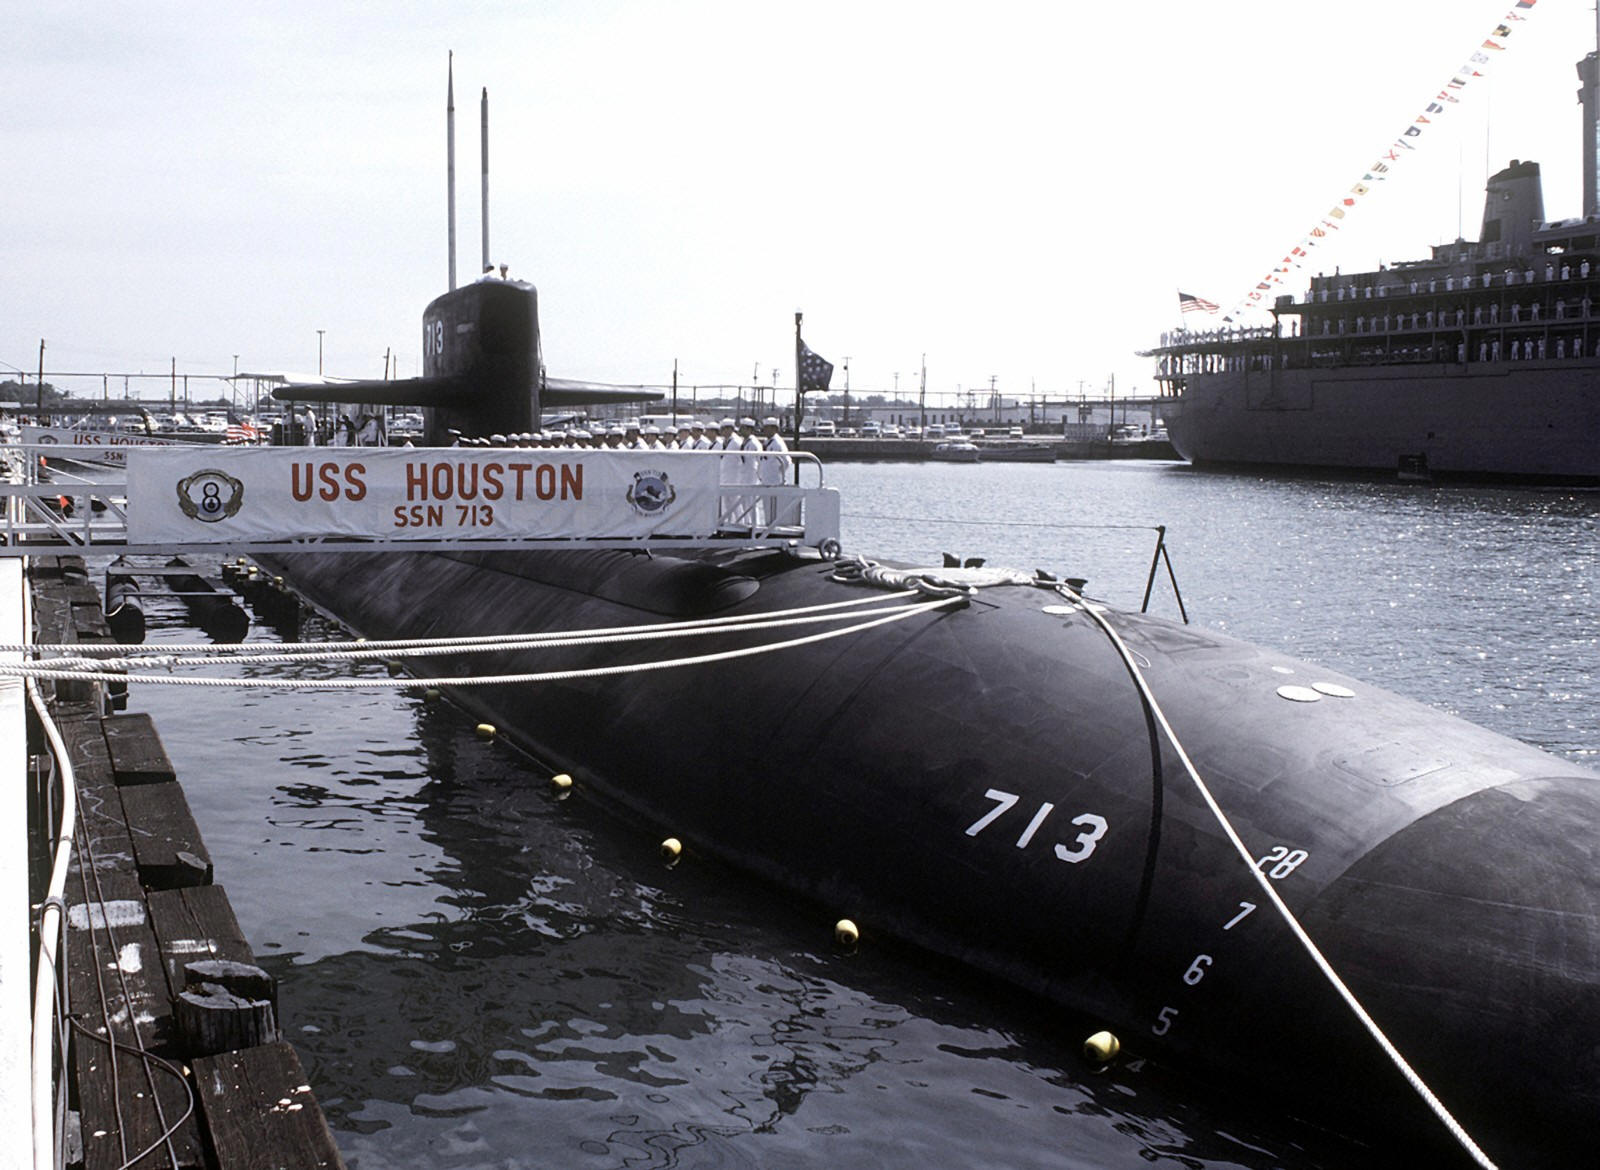 ssn-713 uss houston commissioning ceremony september 1982